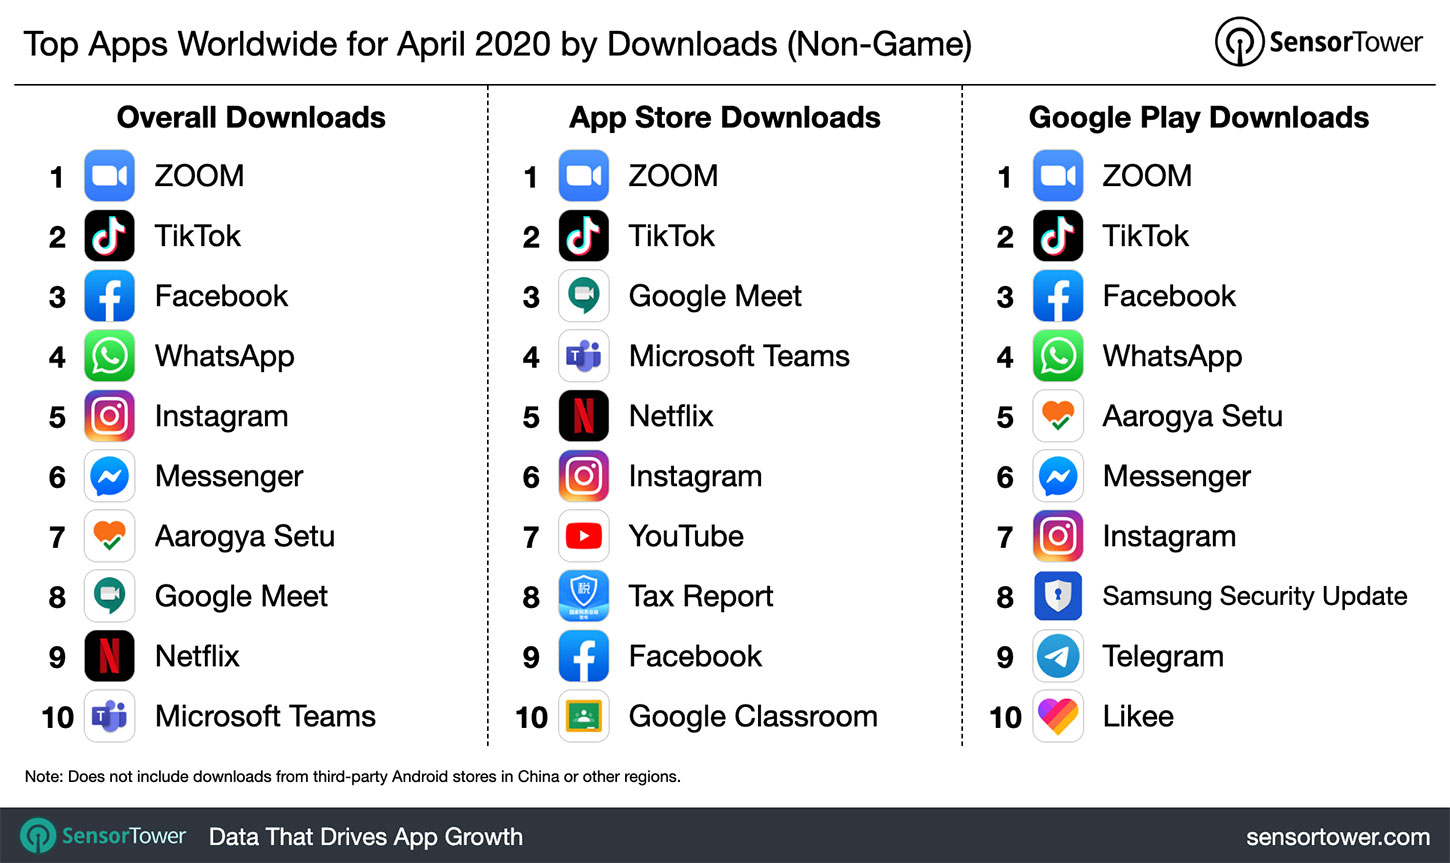 The Top 10 Most Downloaded Apps Worldwide in The Past Month Includes Some  Unusual Entries / Digital Information World